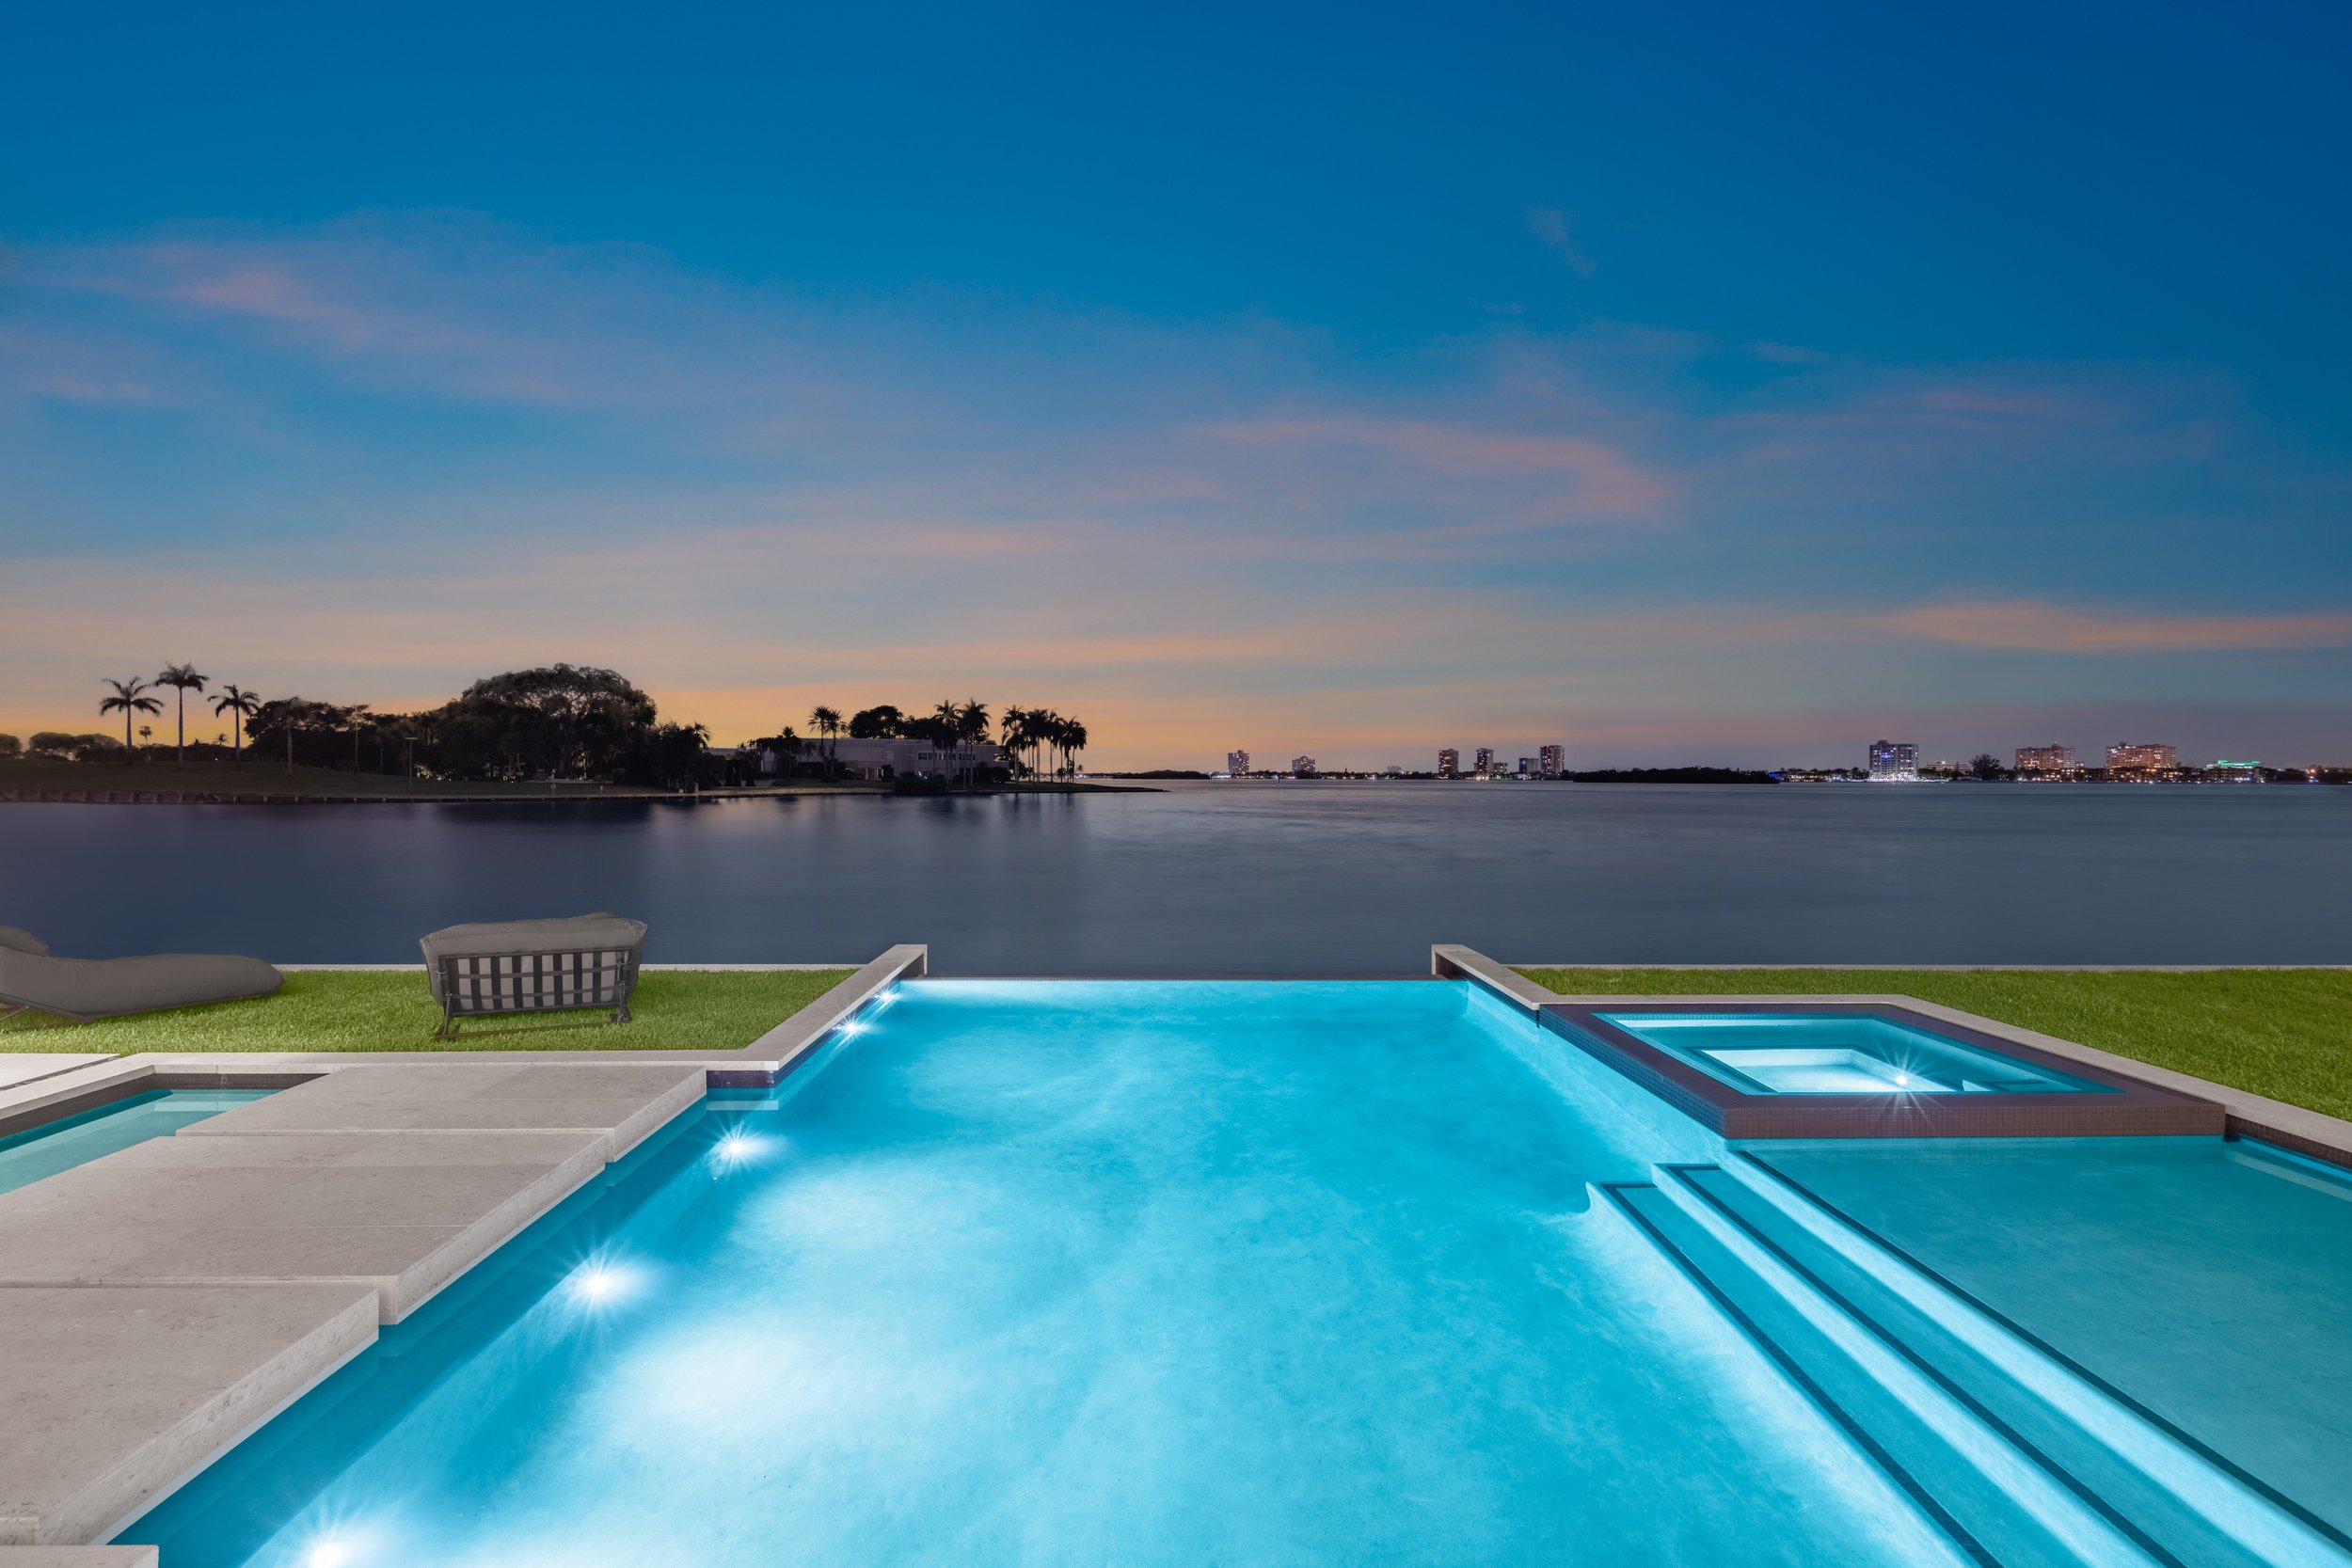 Check Out The Tropical Modern Waterfront On Bay Harbor Islands Asking $22.95 Million 15.jpg